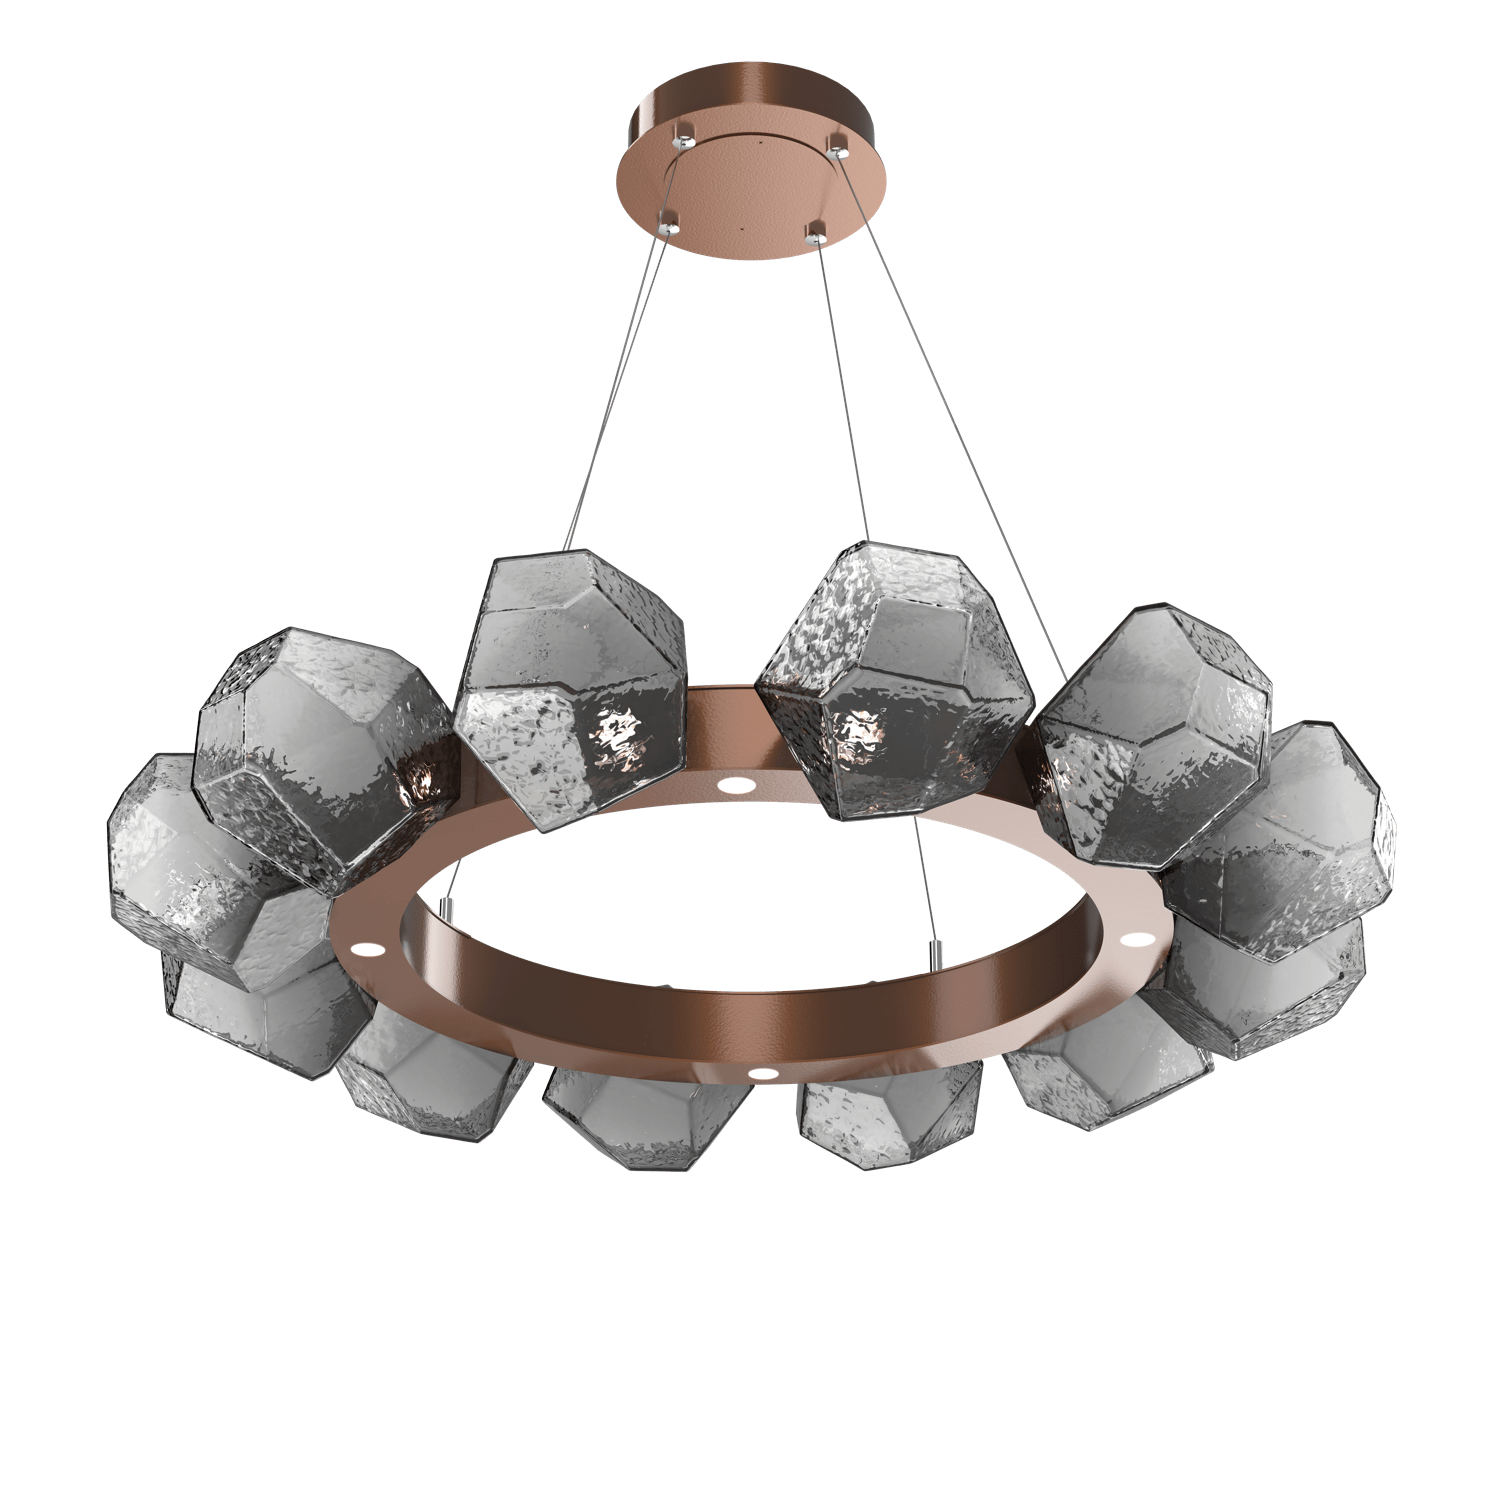 CHB0039-36-BB-S-Hammerton-Studio-Gem-36-inch-radial-ring-chandelier-with-burnished-bronze-finish-and-smoke-blown-glass-shades-and-LED-lamping